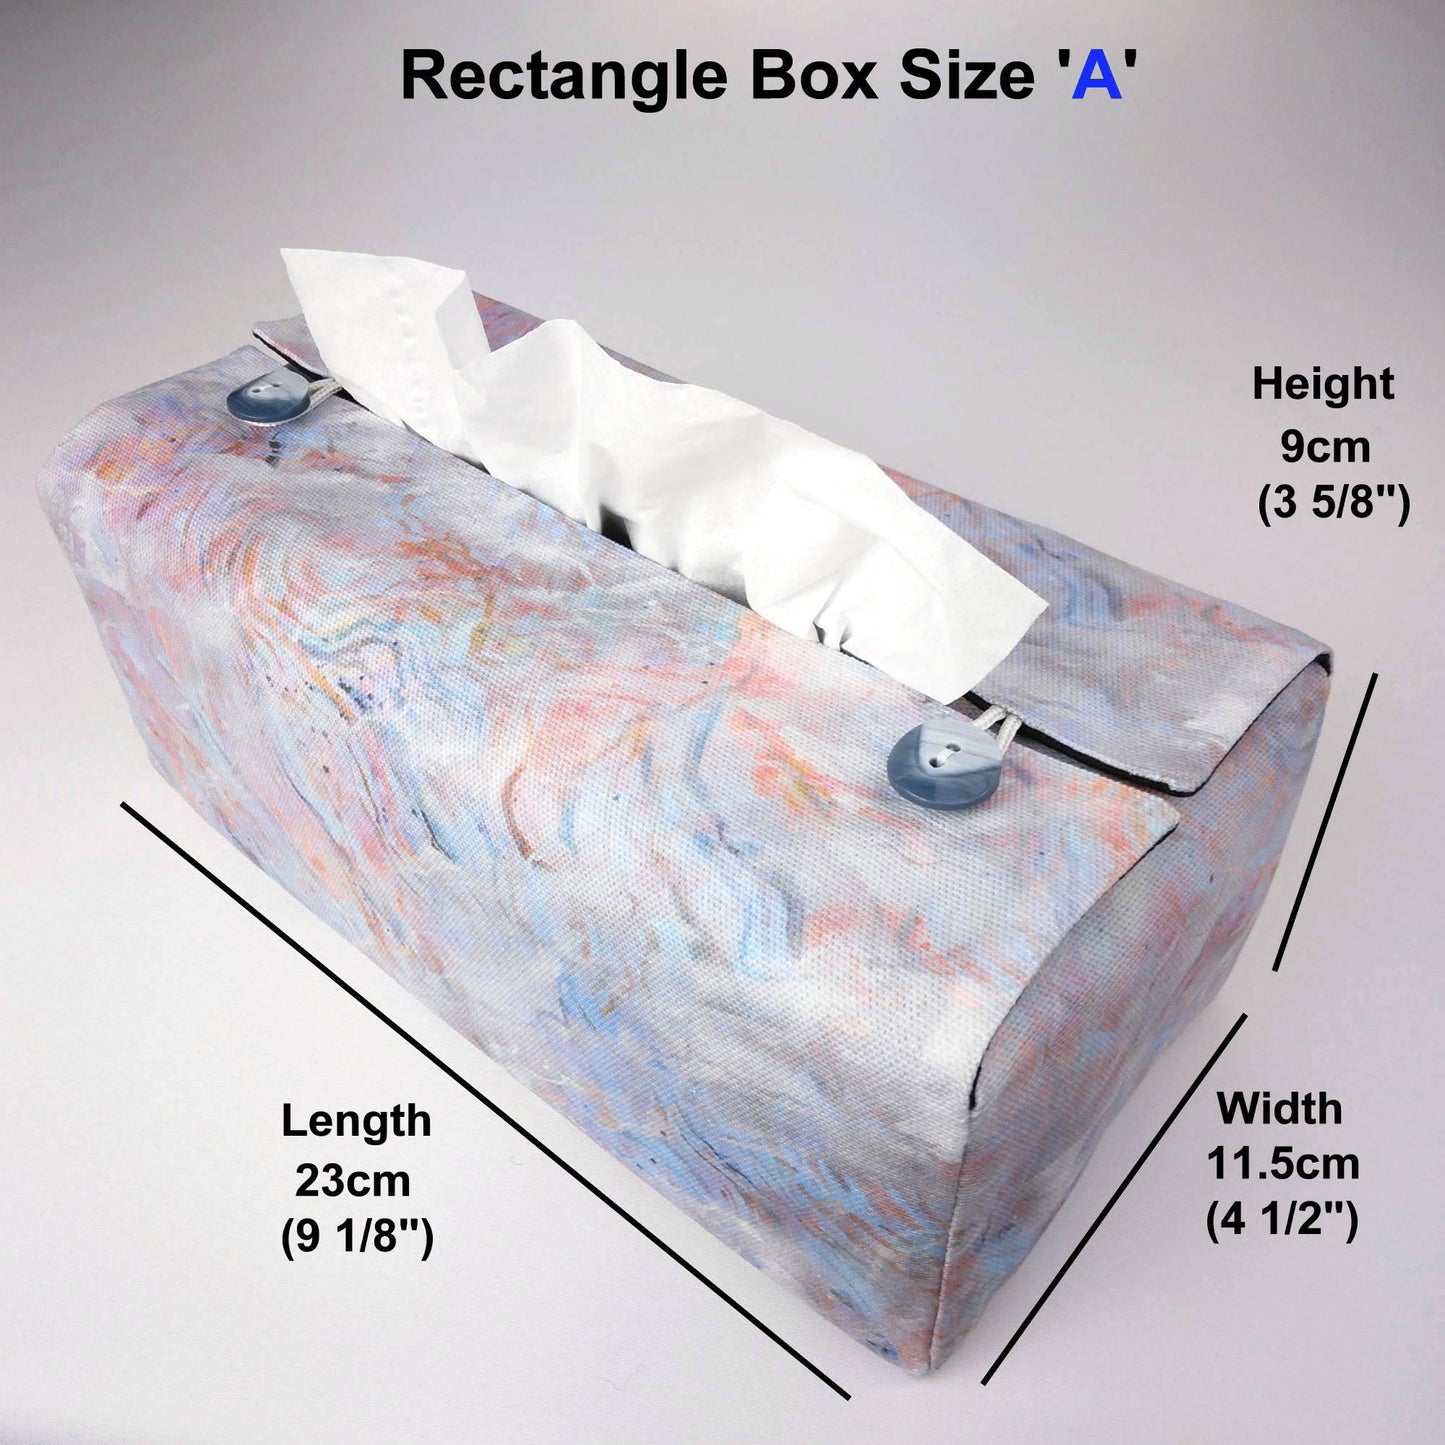 Rectangle tissue box cover with white, orange, pink, blue and grey abstract pattern